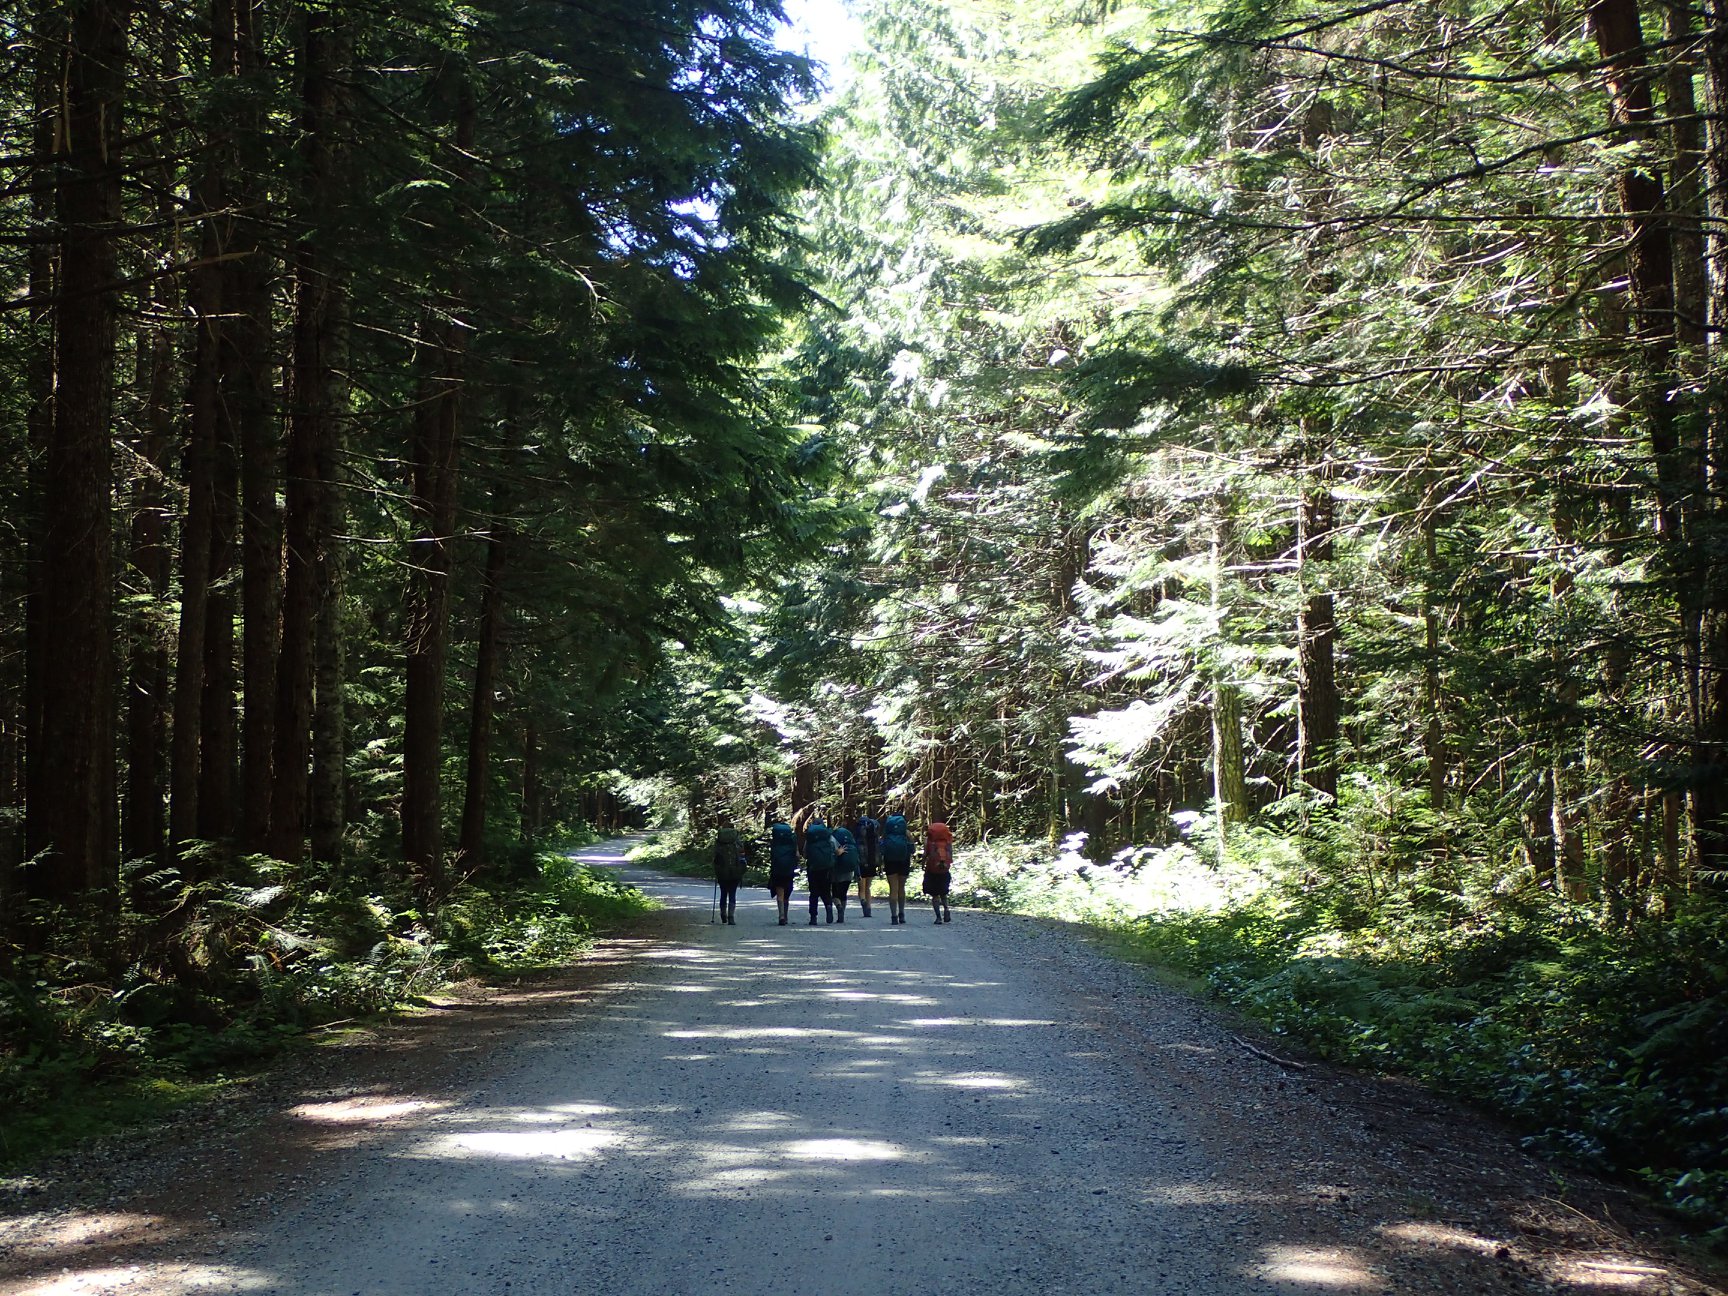  Six youth walking together down forest path 